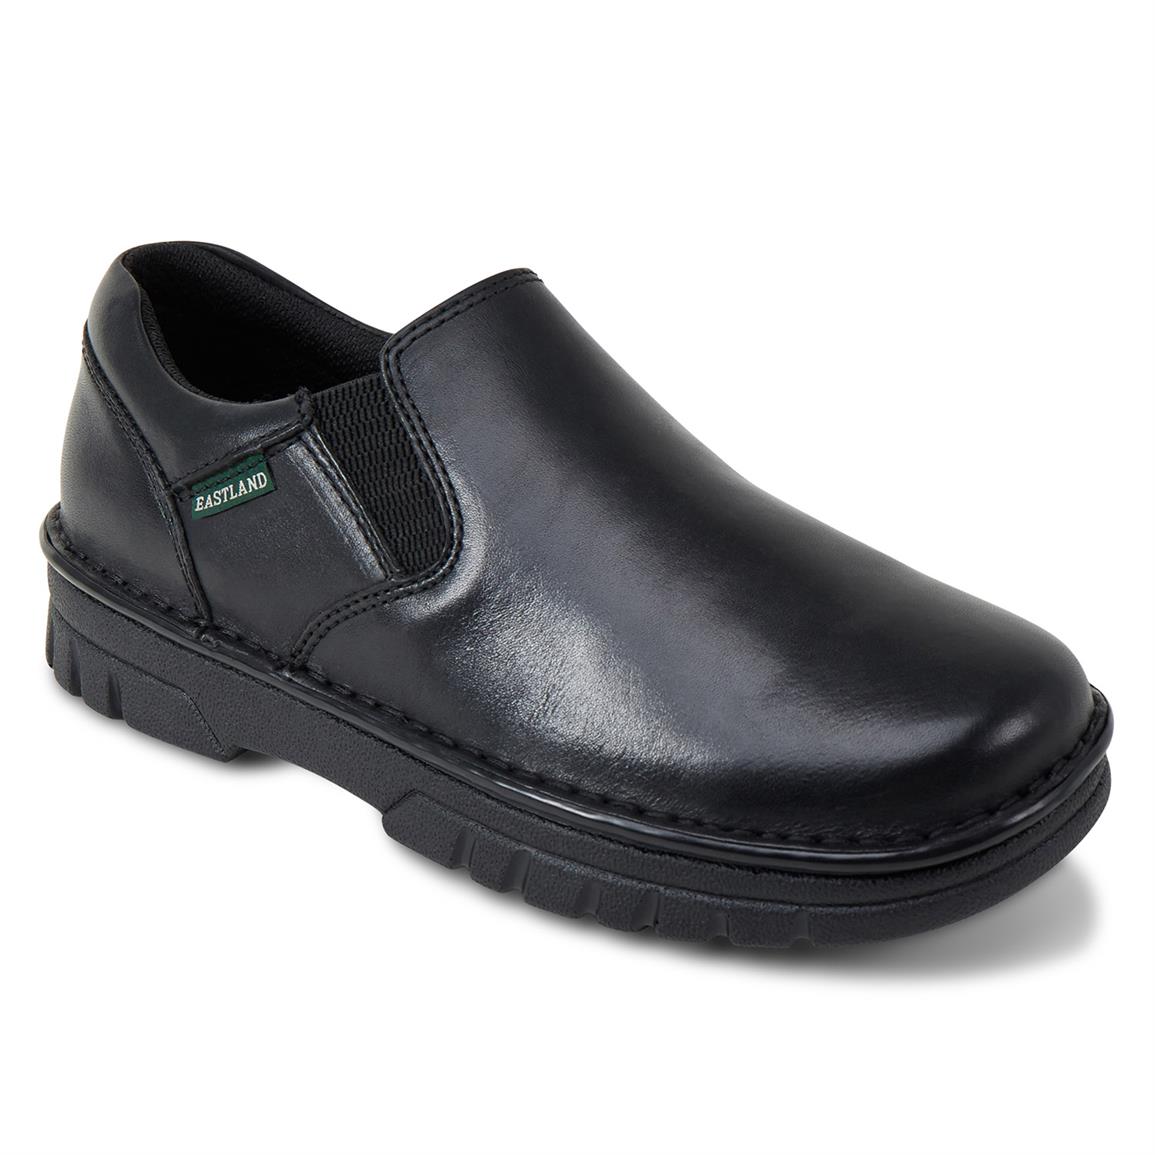 Eastland Newport Slip-on Shoes - 662695, Casual Shoes at Sportsman's Guide